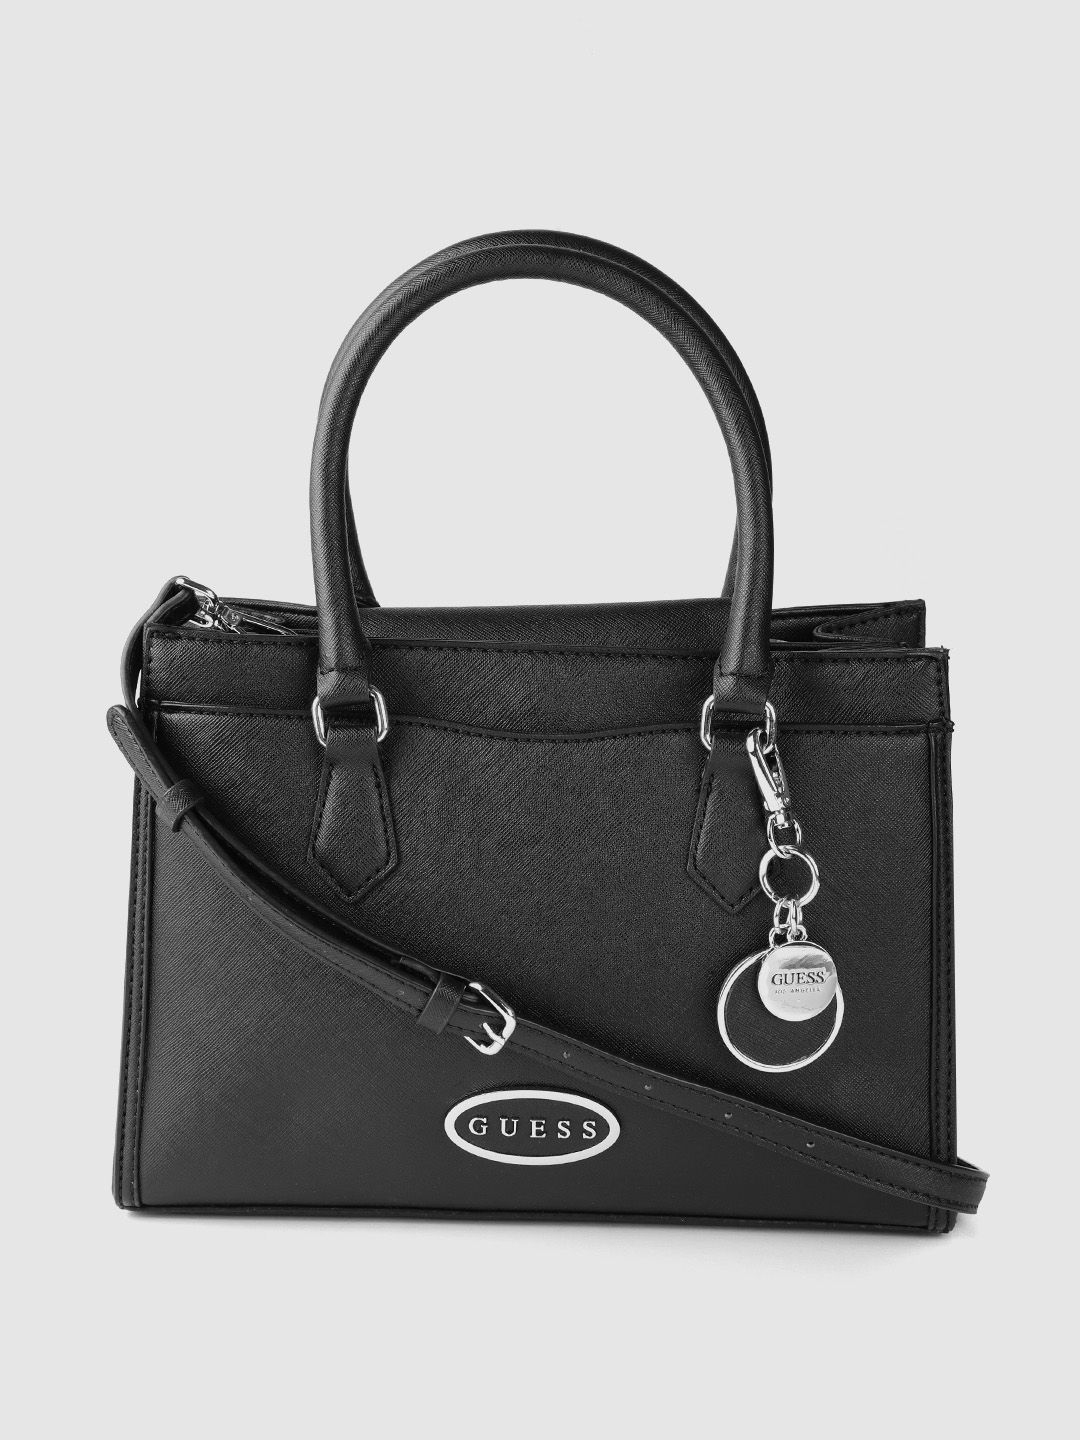 GUESS Black Saffiano Textured Structured Handheld Bag with Tab & Detachable Sling Strap Price in India